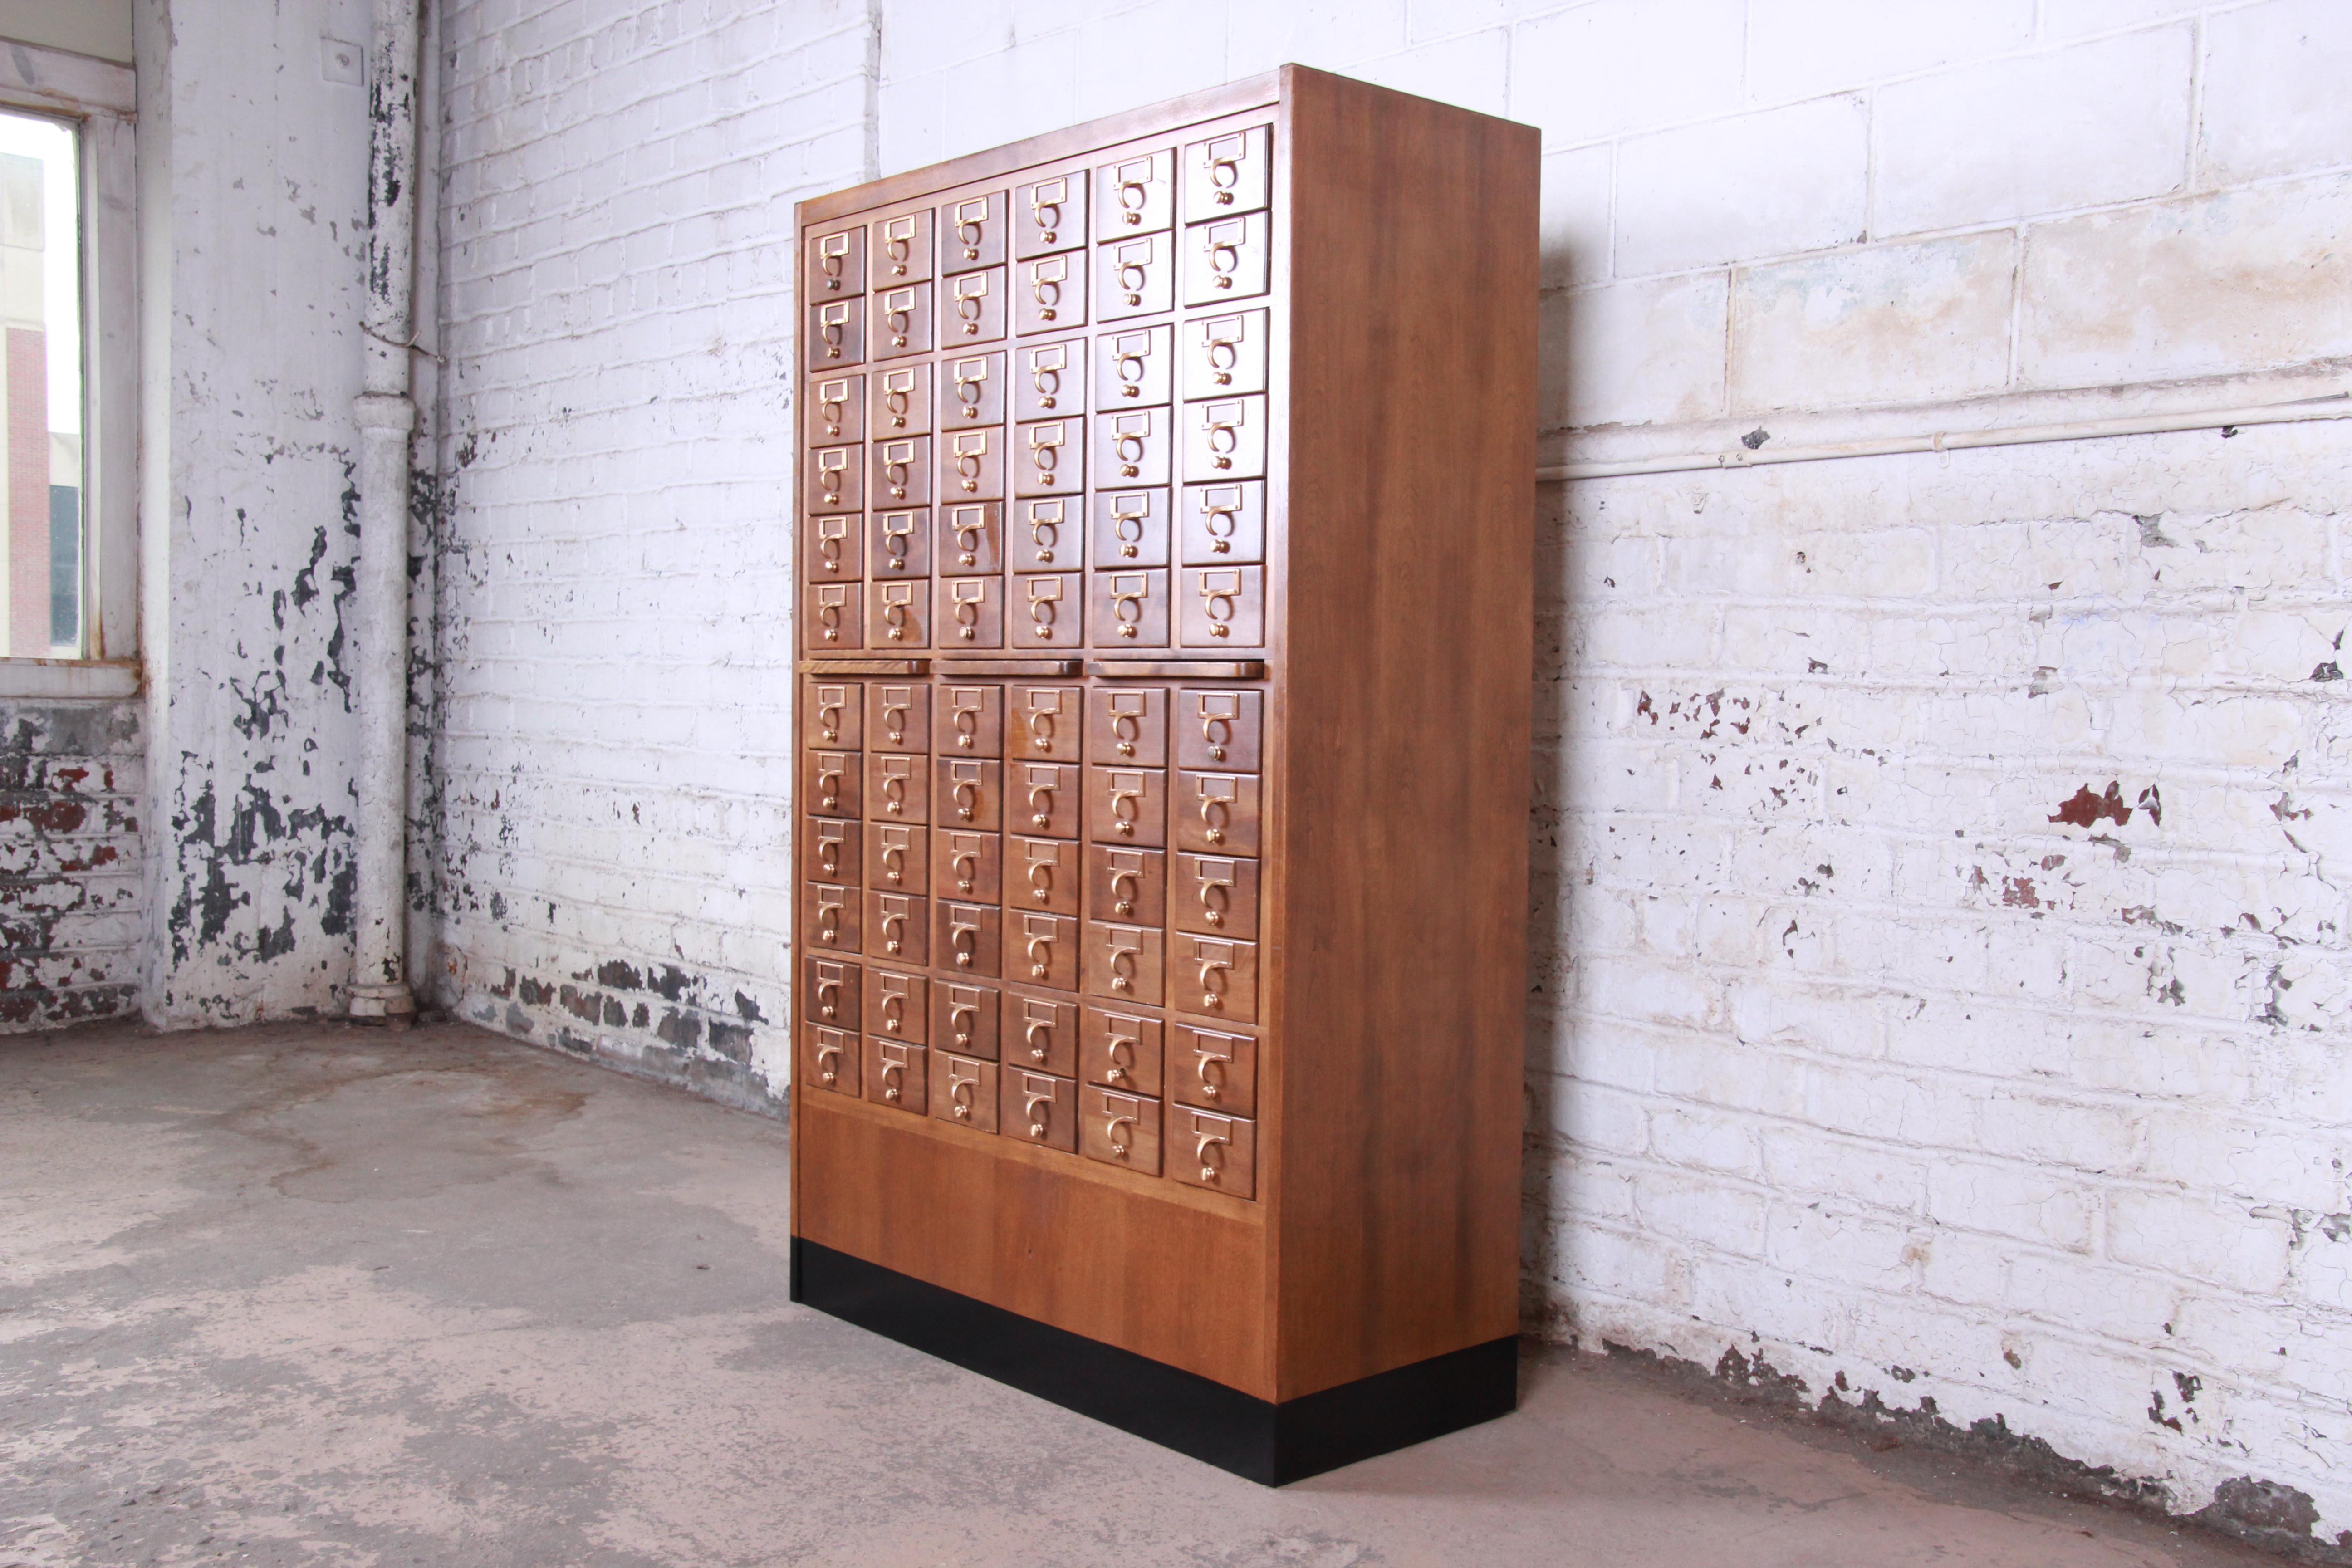 An exceptional midcentury library card catalog cabinet. The card catalog features beautiful wood grain and an amazing 72 dovetailed drawers. All of the drawers slide well, and they have adjustable dividers. There are three pull-out writing tablets,